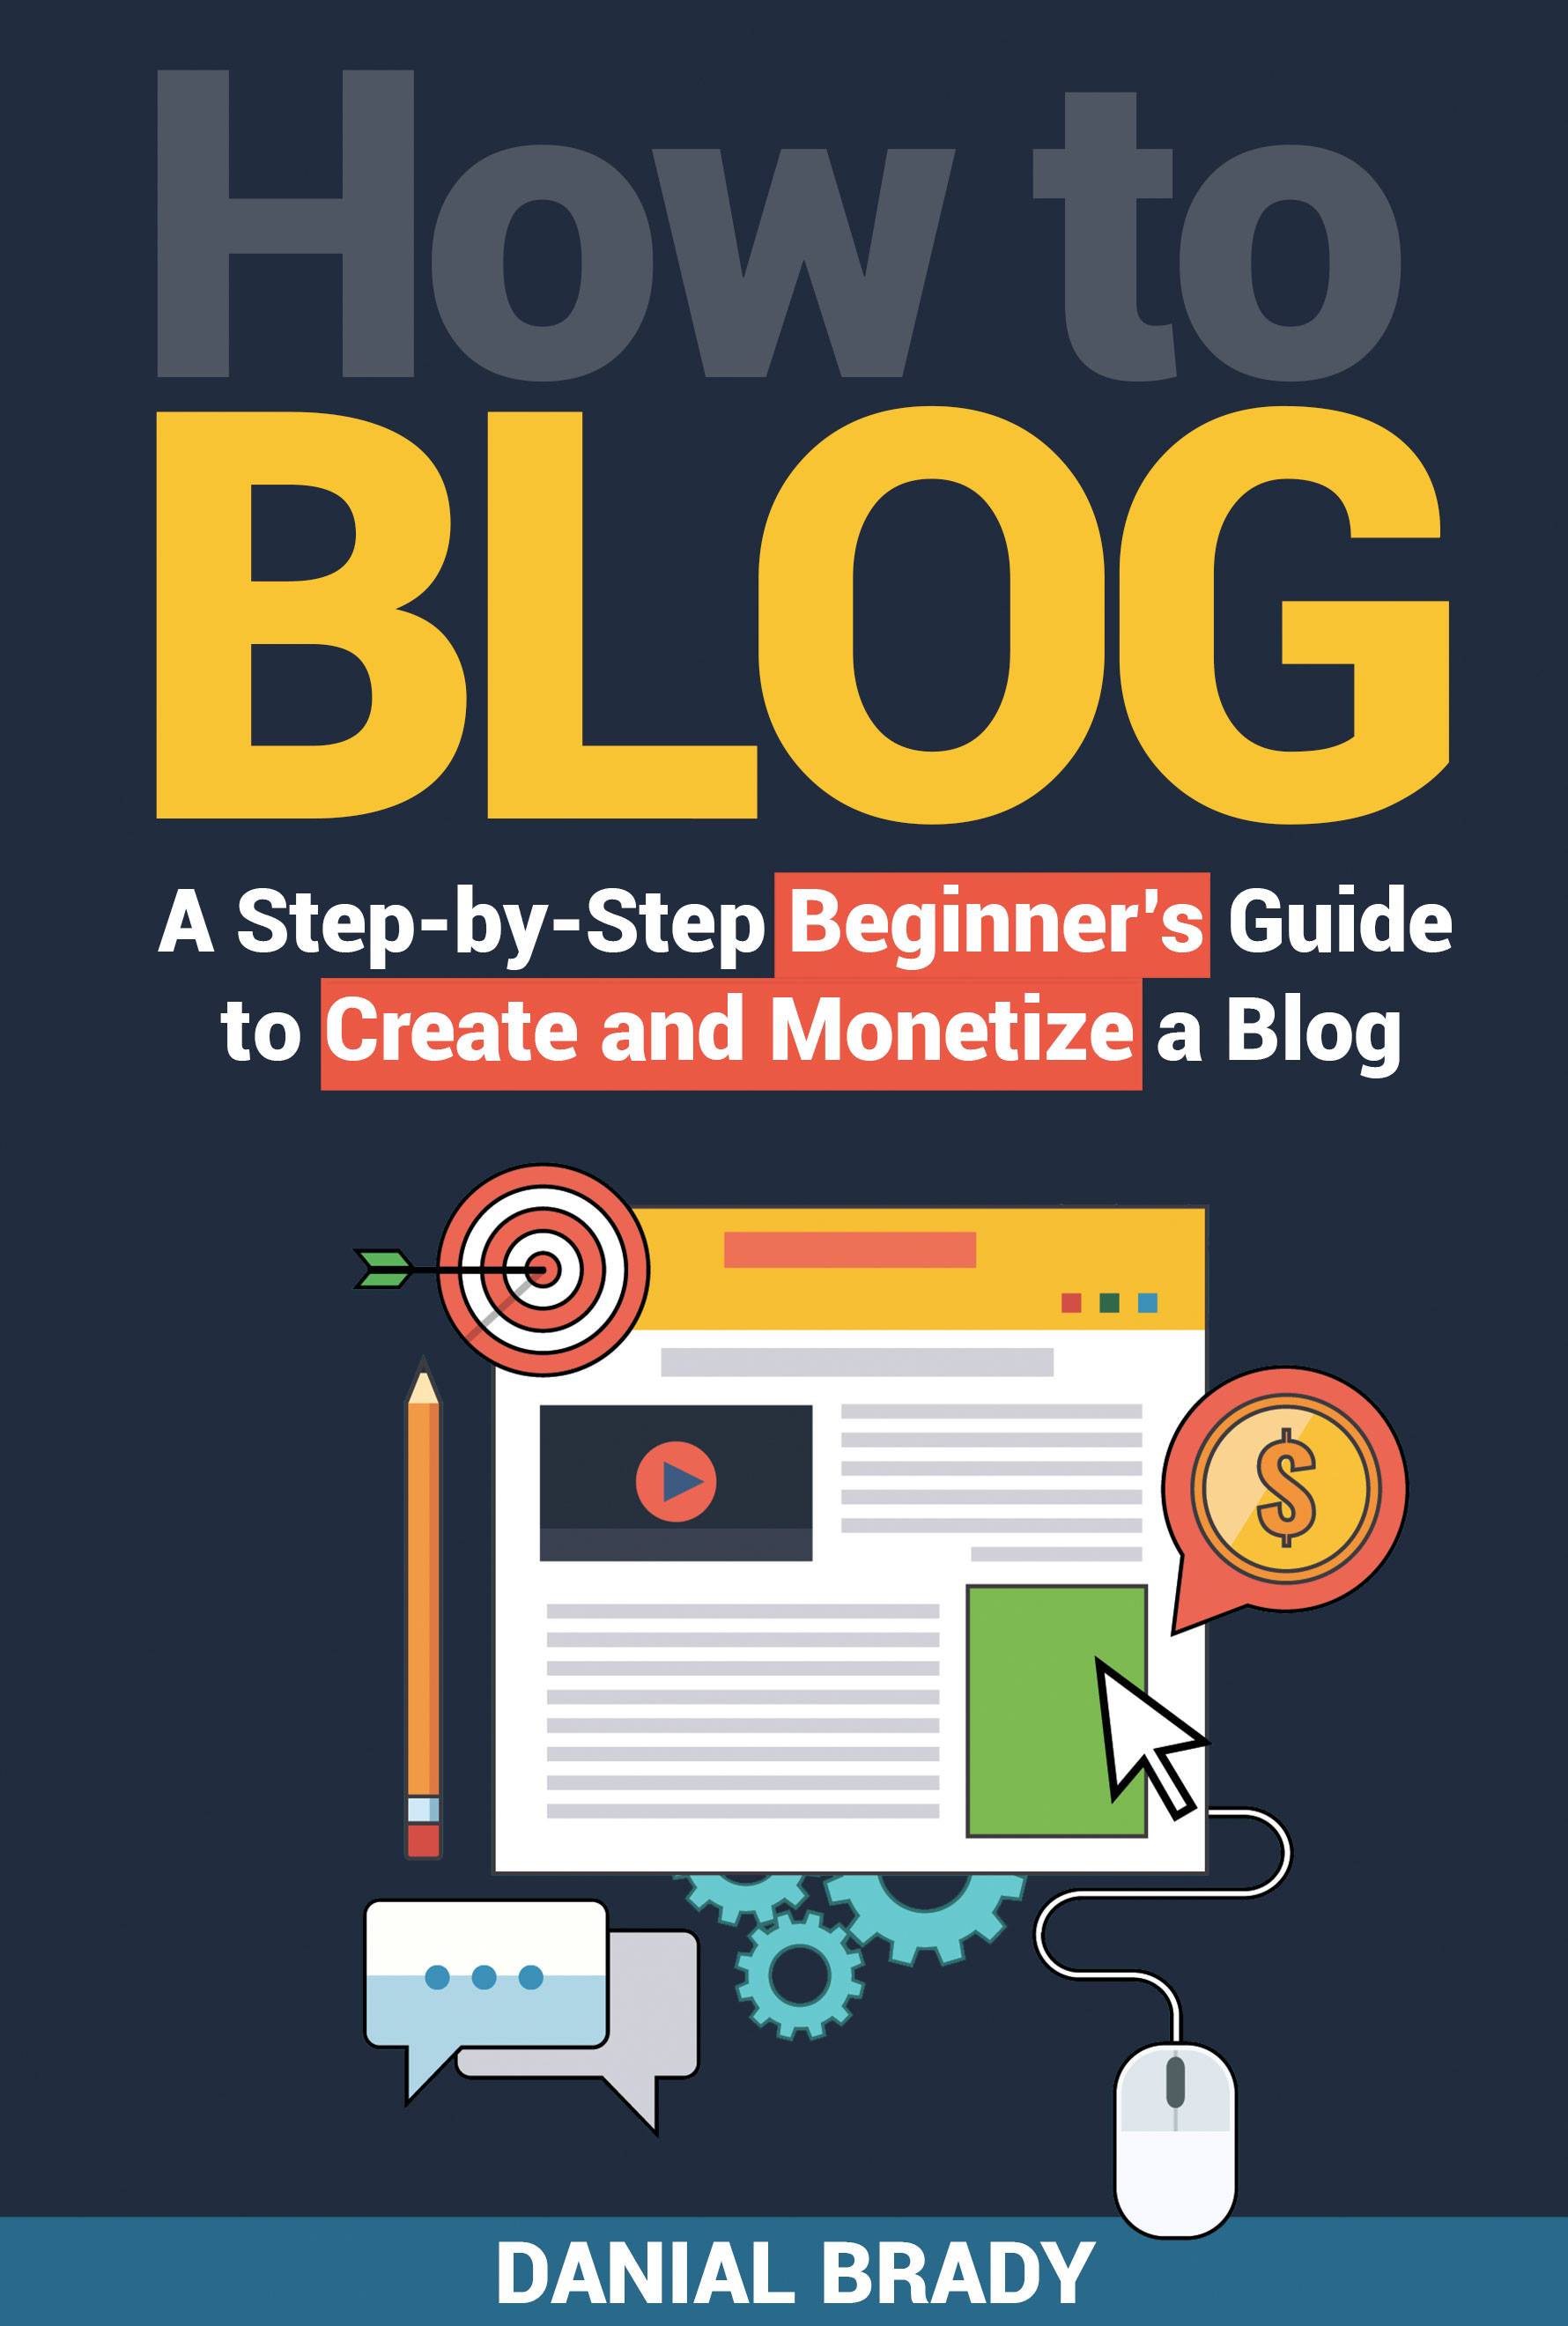 FREE: How to Blog: A Step-by-Step Beginner’s Guide to Create and Monetize a Blog by Danial Brady